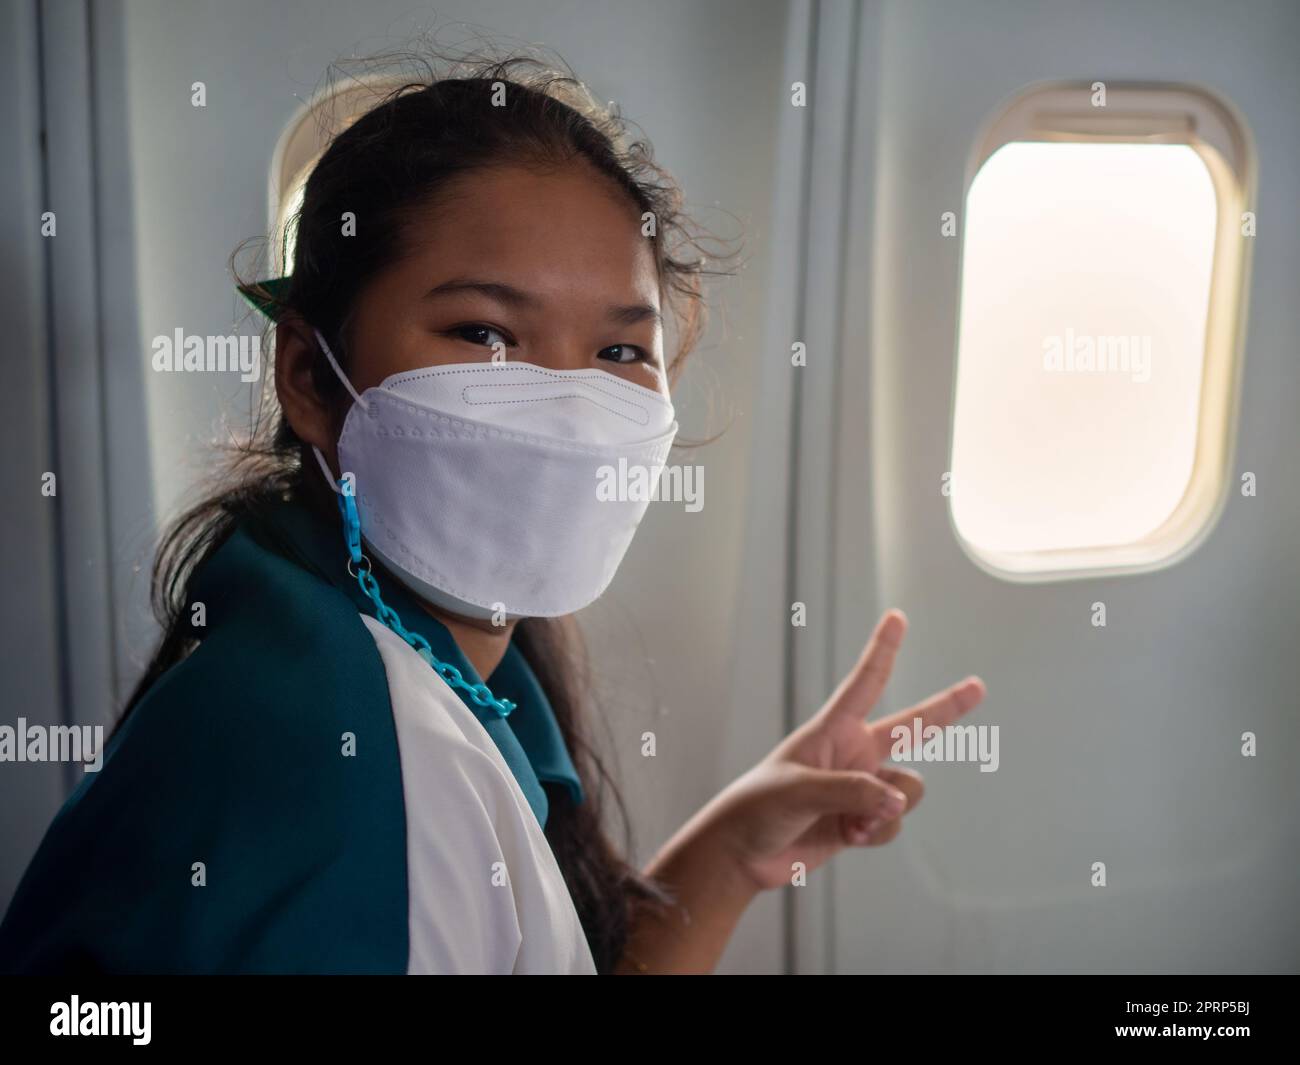 A woman wearing a mask is sitting by the window of an airplane. Stock Photo